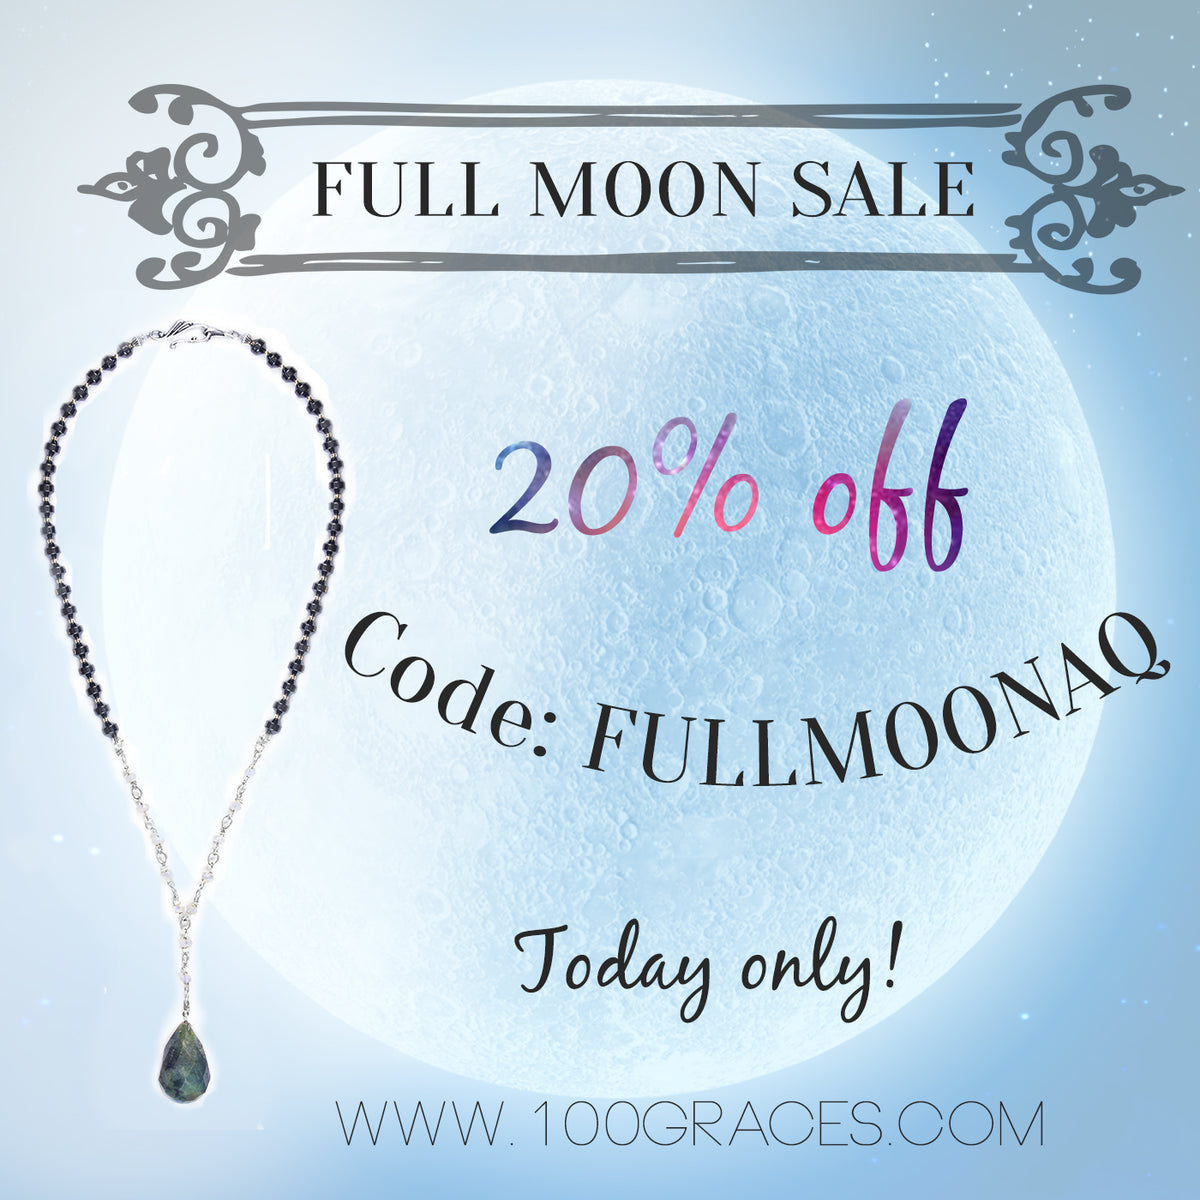 Full Moon Sale Today!